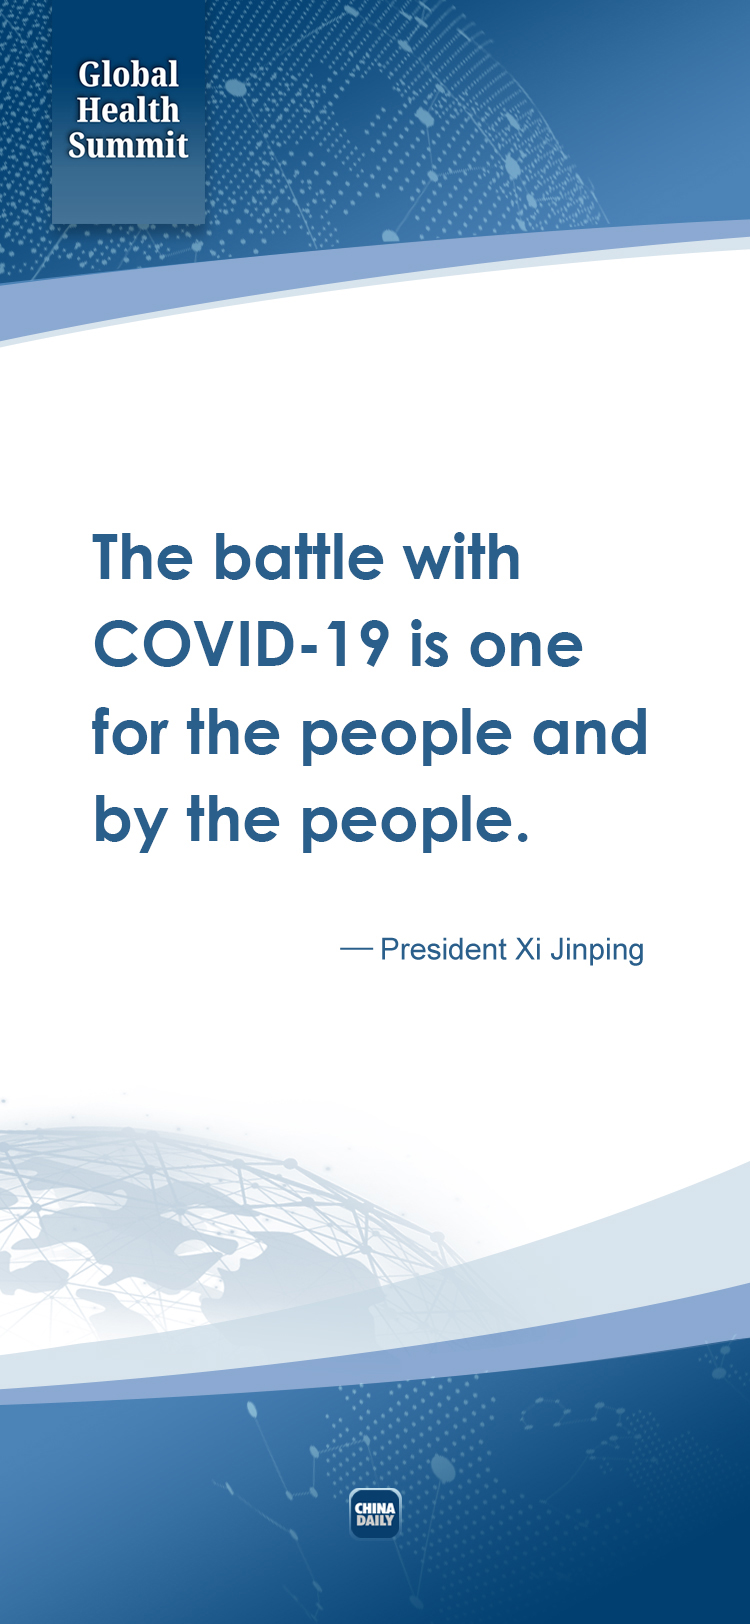 china pledges new aid for global covid-19 response